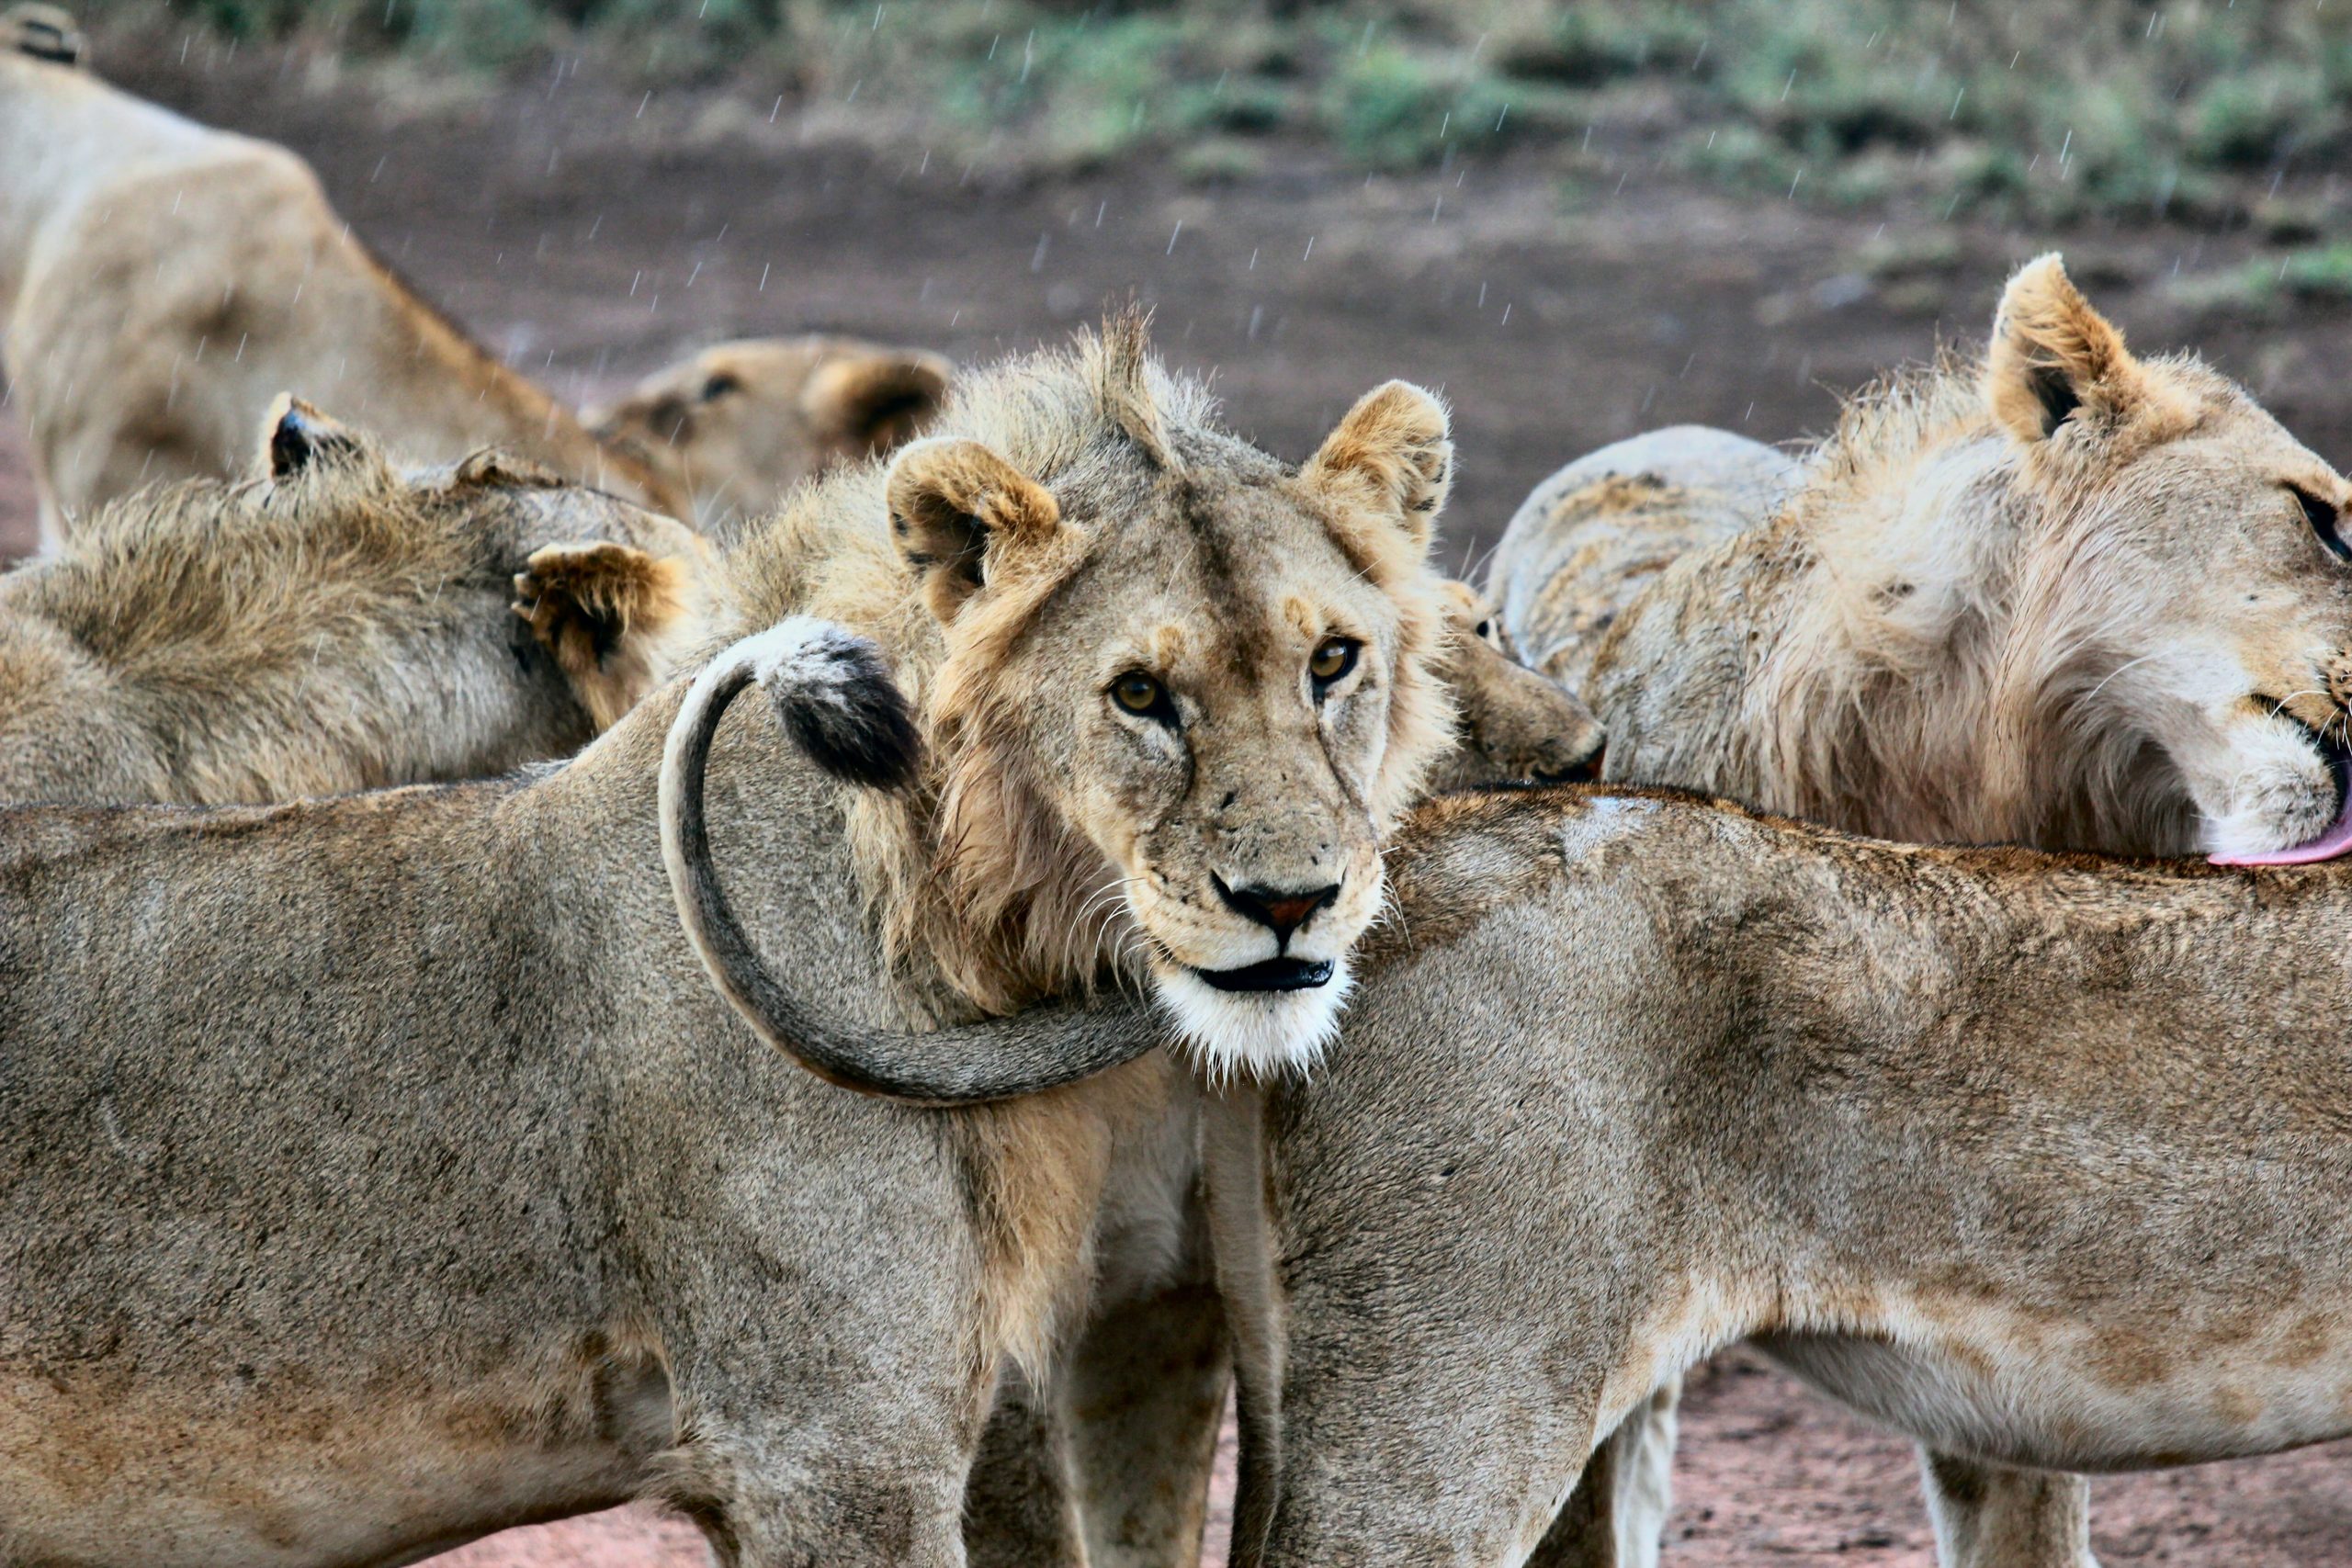 A young male lion with a short mane looks at the camera in Serengeti, Tanzania